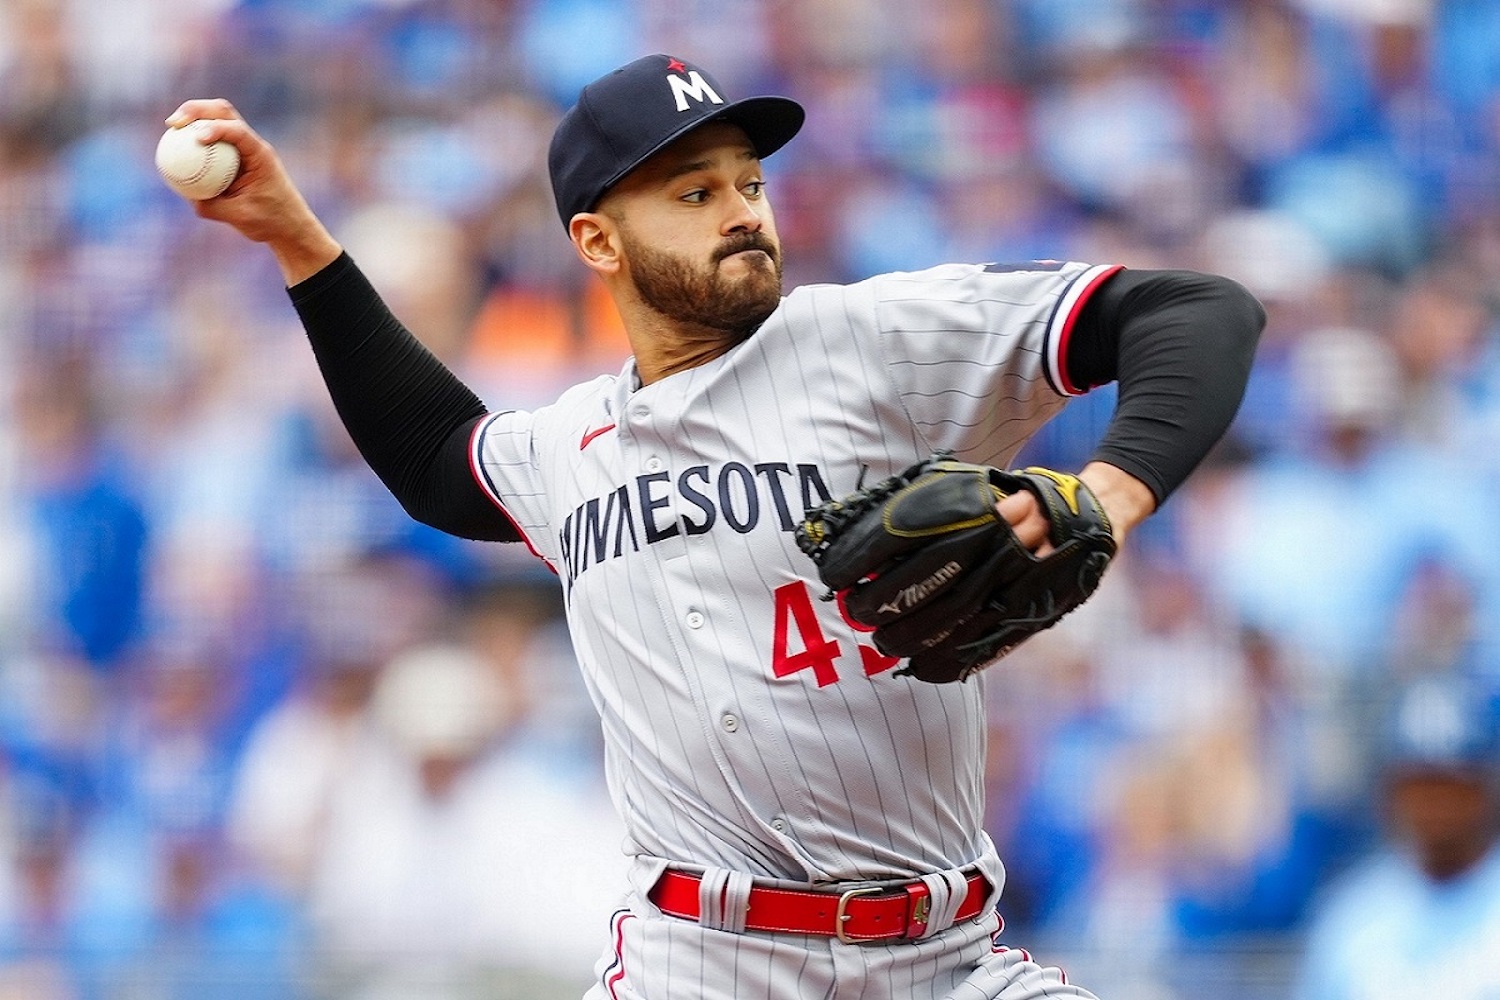 Pablo López puts on a master class in pitching as Twins even series